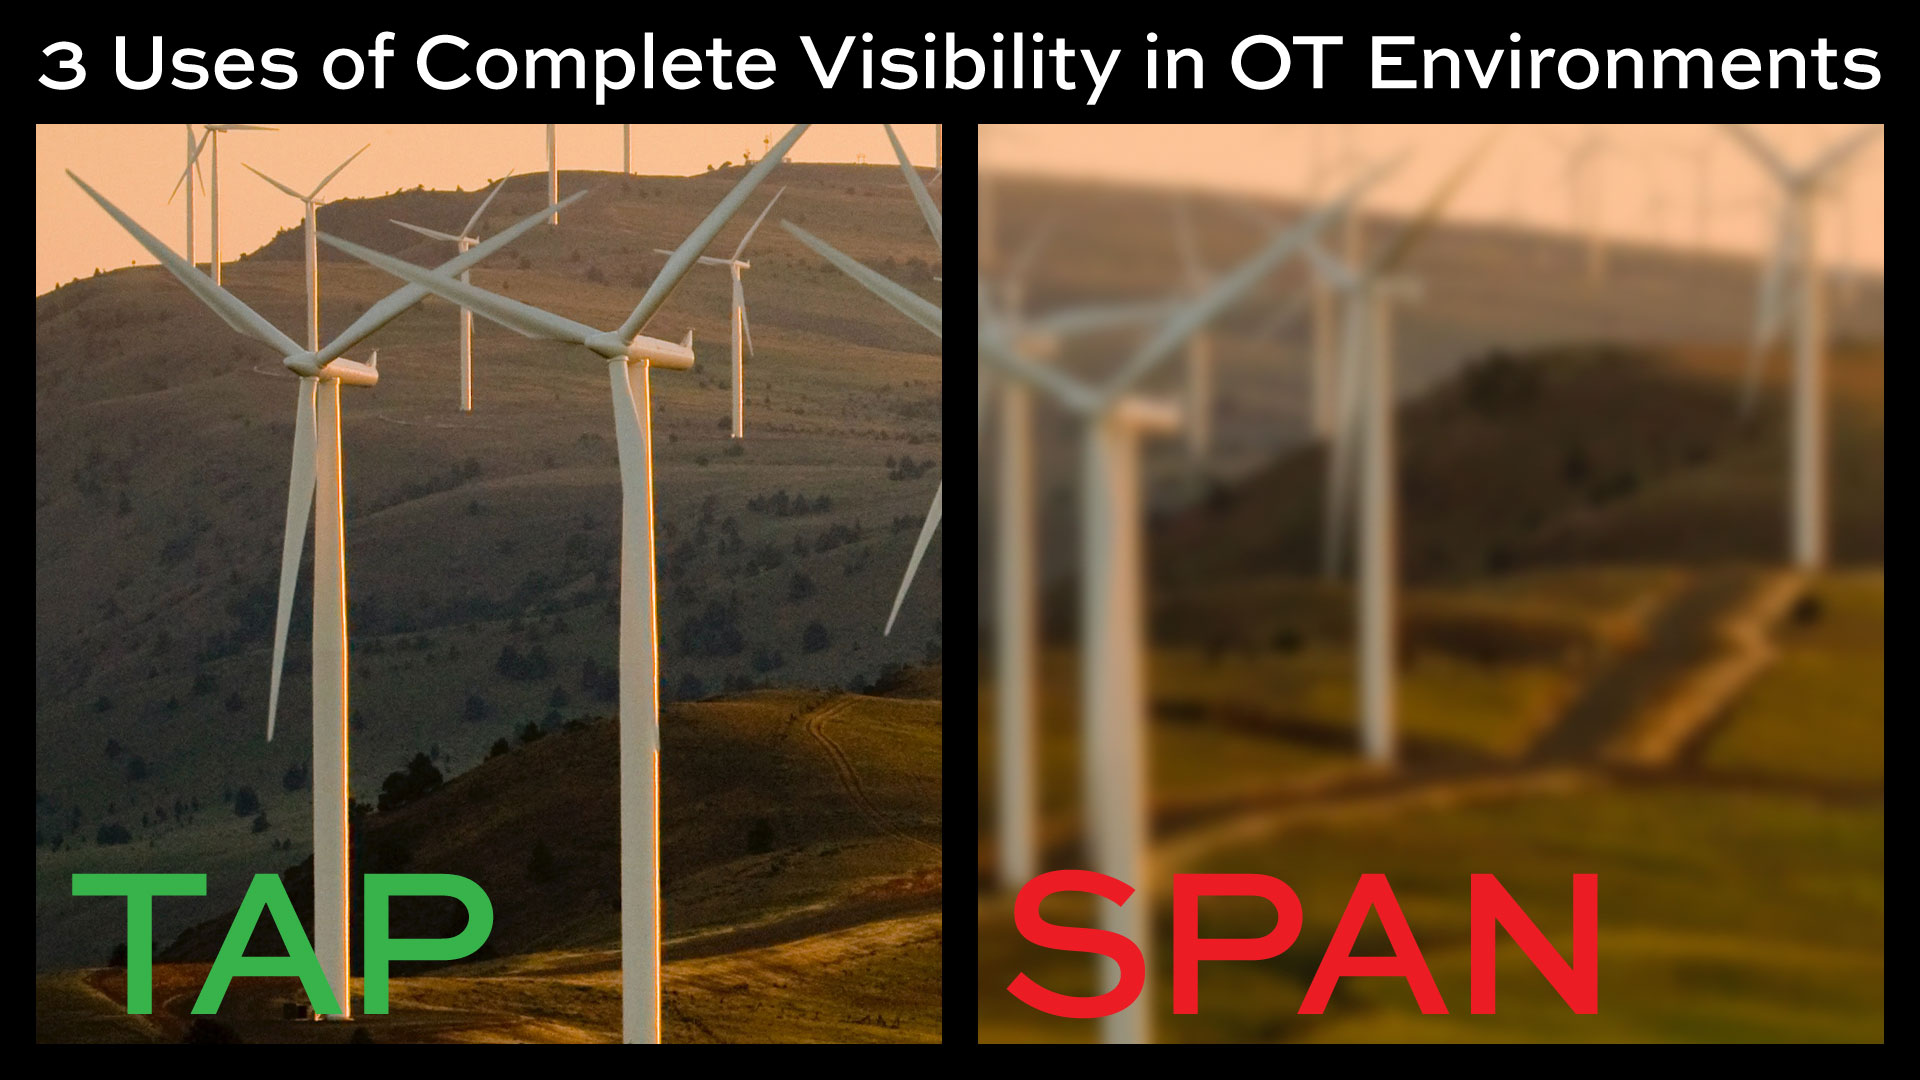 3 Uses of Complete Visibility in OT Environments